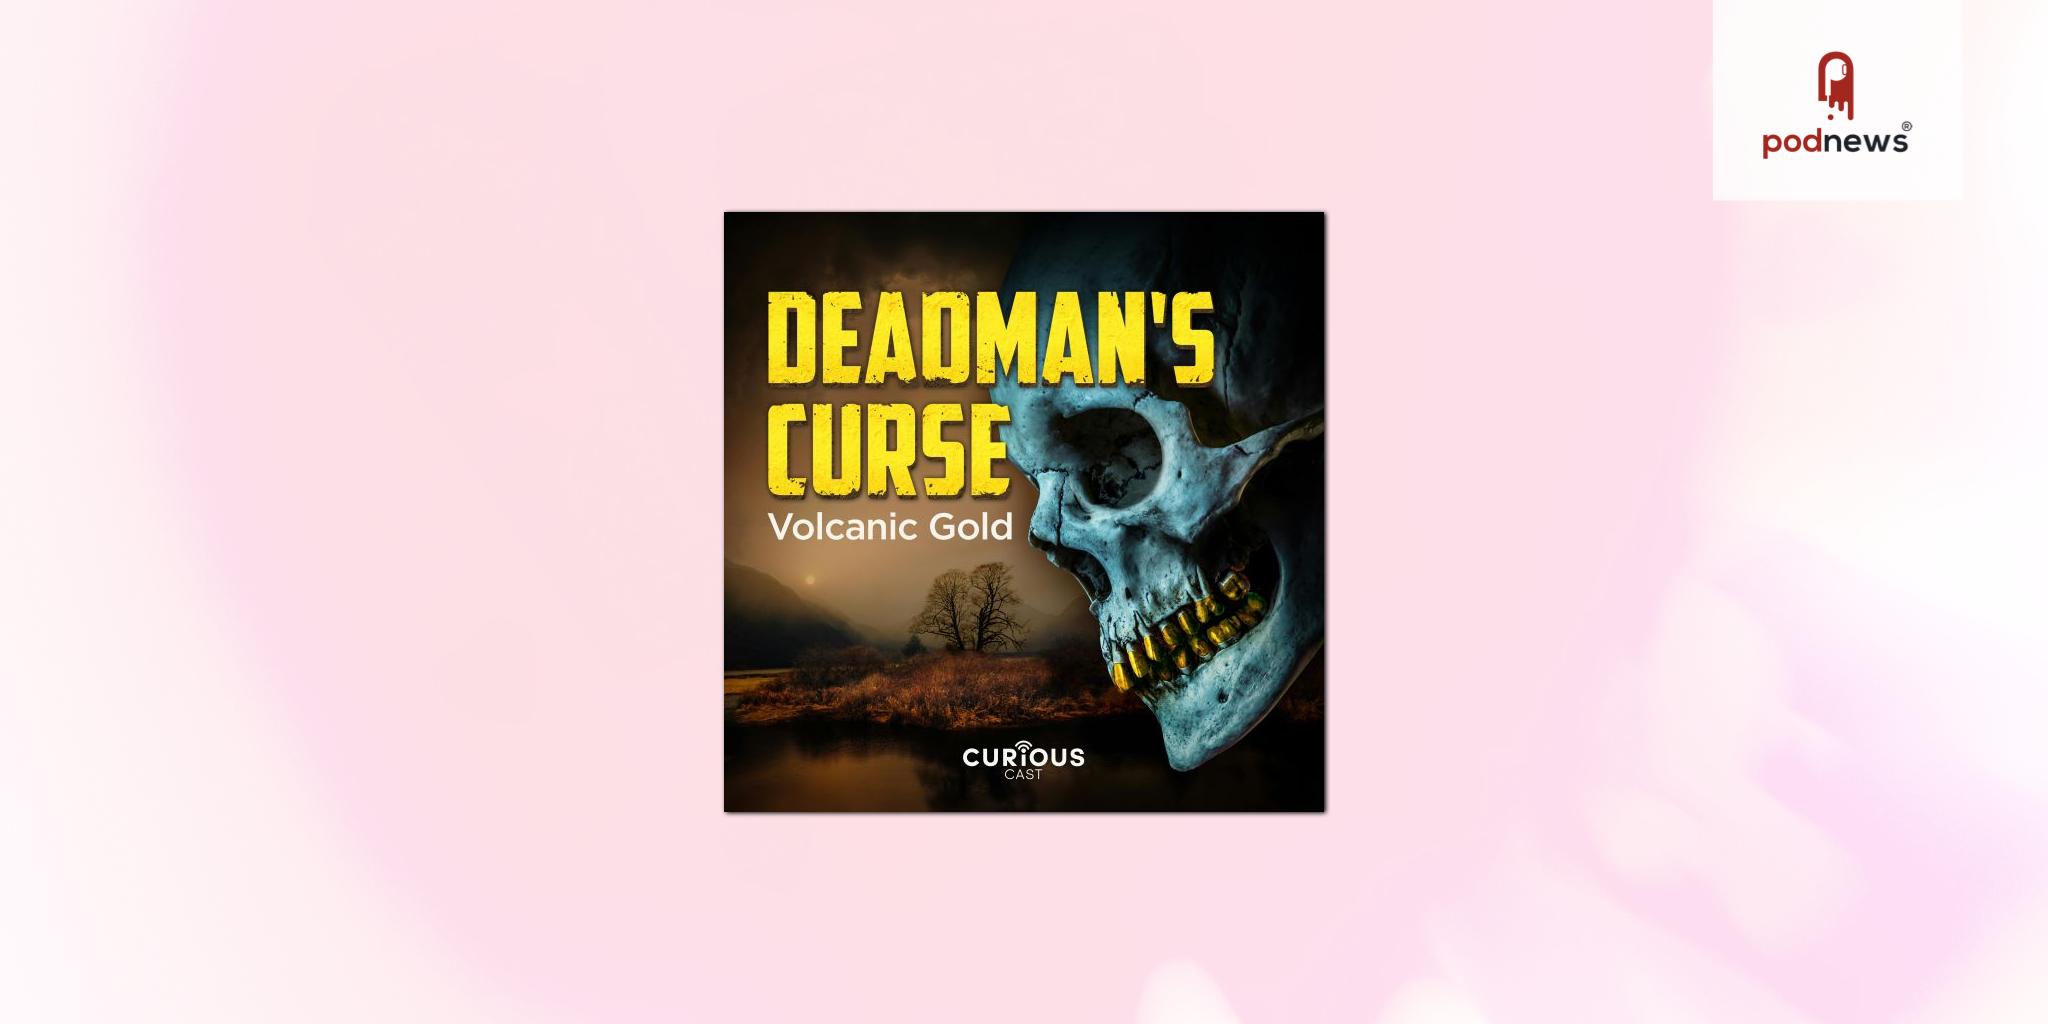 CuriousCast's award-winning podcast, Deadman's Curse, is back with season two